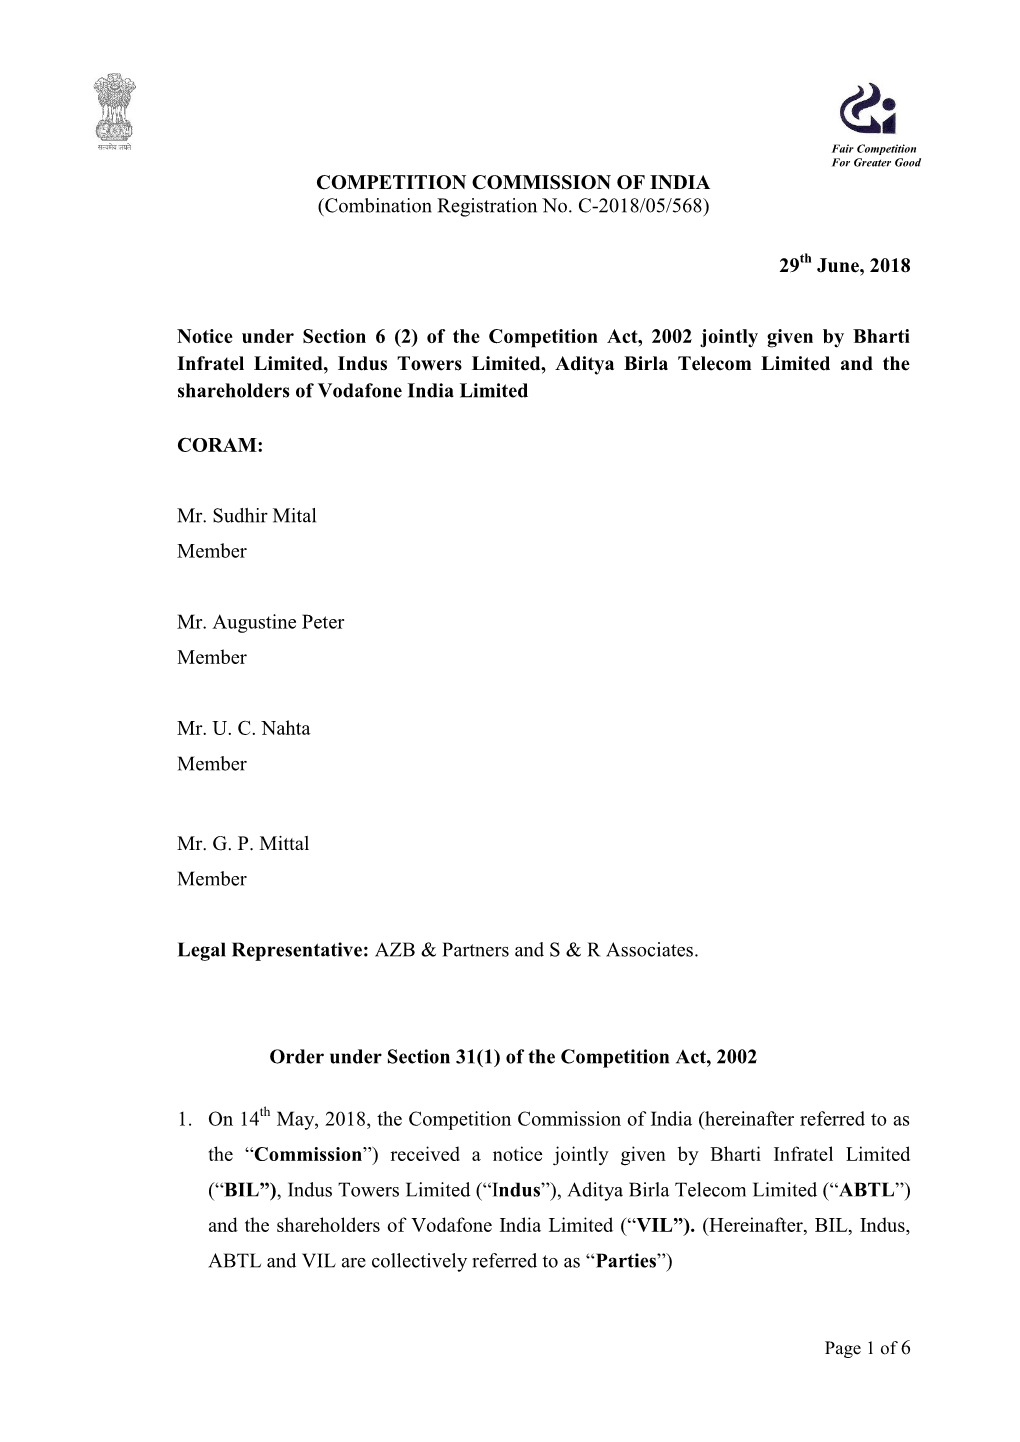 COMPETITION COMMISSION of INDIA (Combination Registration No. C-2018/05/568) 29 June, 2018 Notice Under Section 6 (2) of The